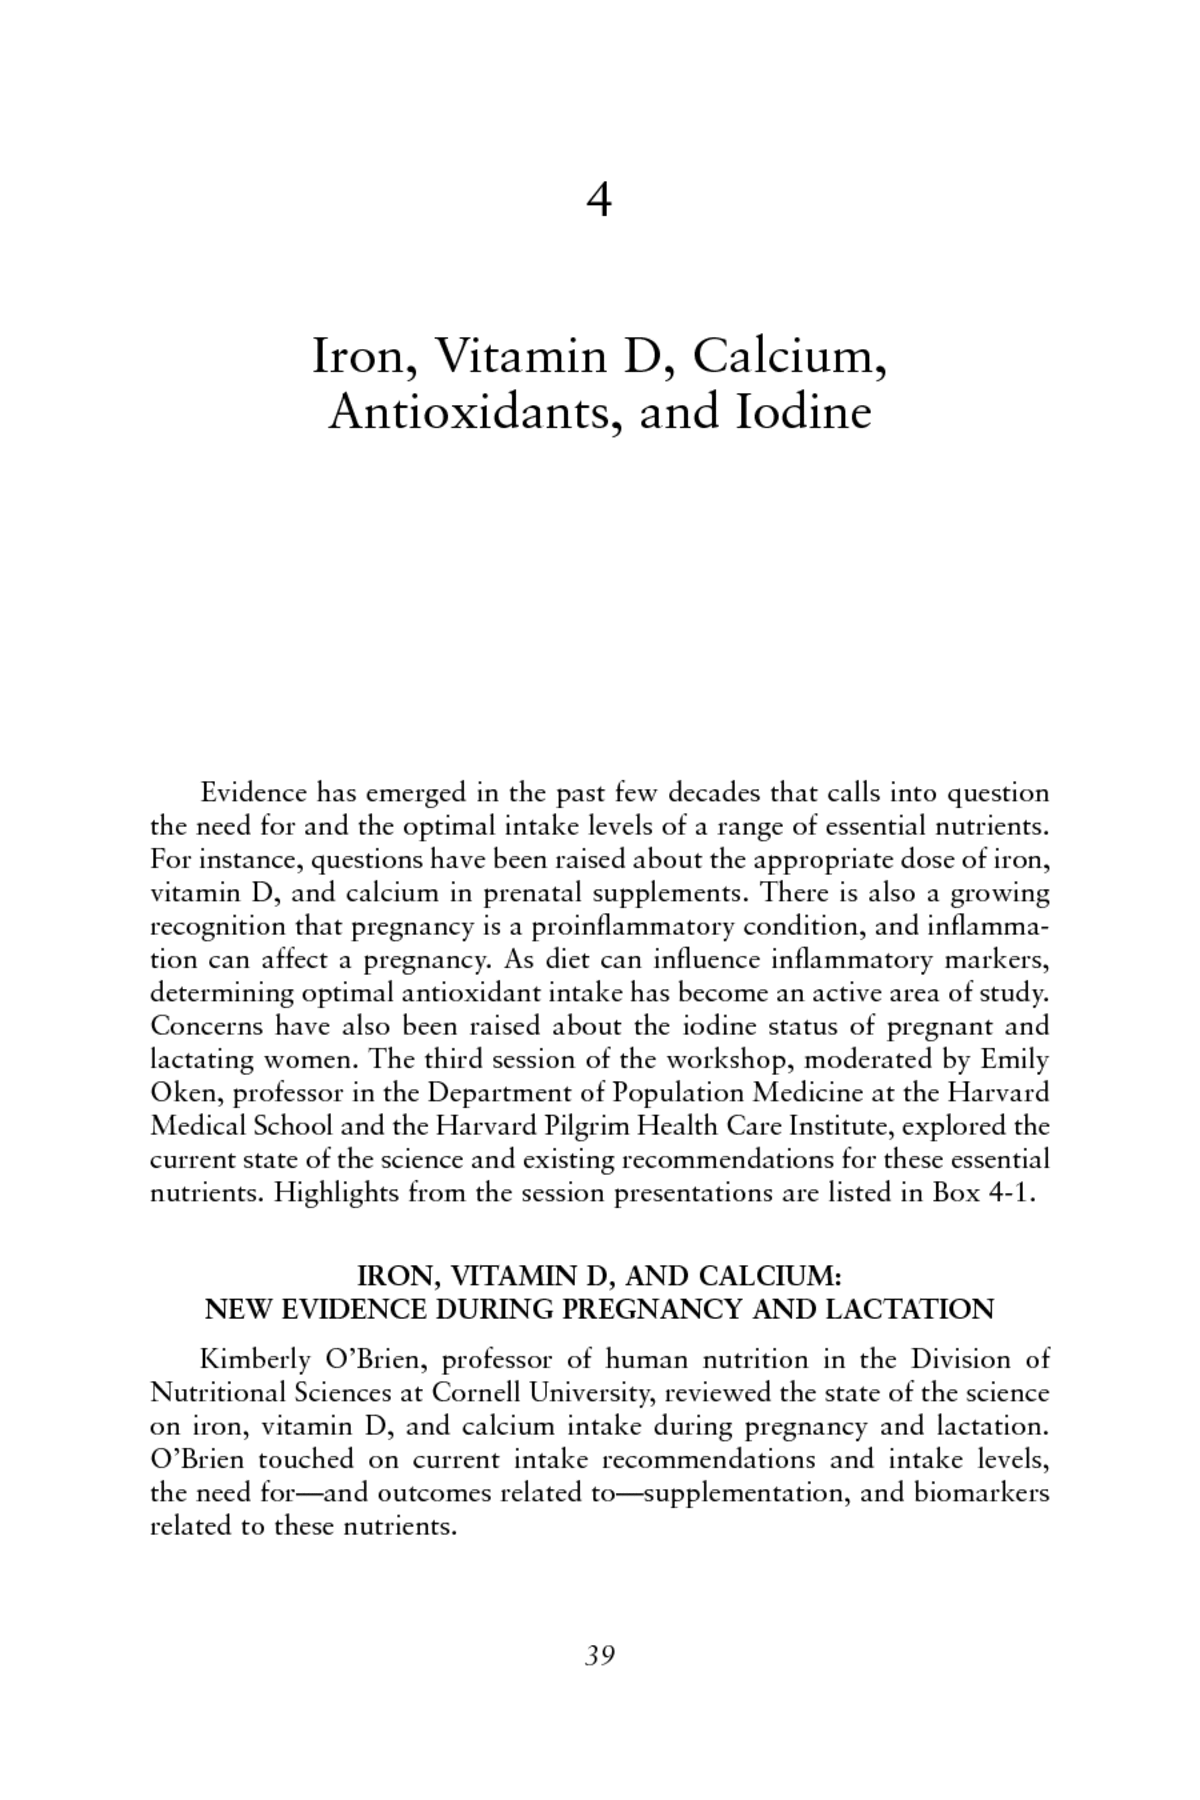 Iron Vitamin D Calcium Antioxidants And Iodine Nutrition During Pregnancy And Lactation